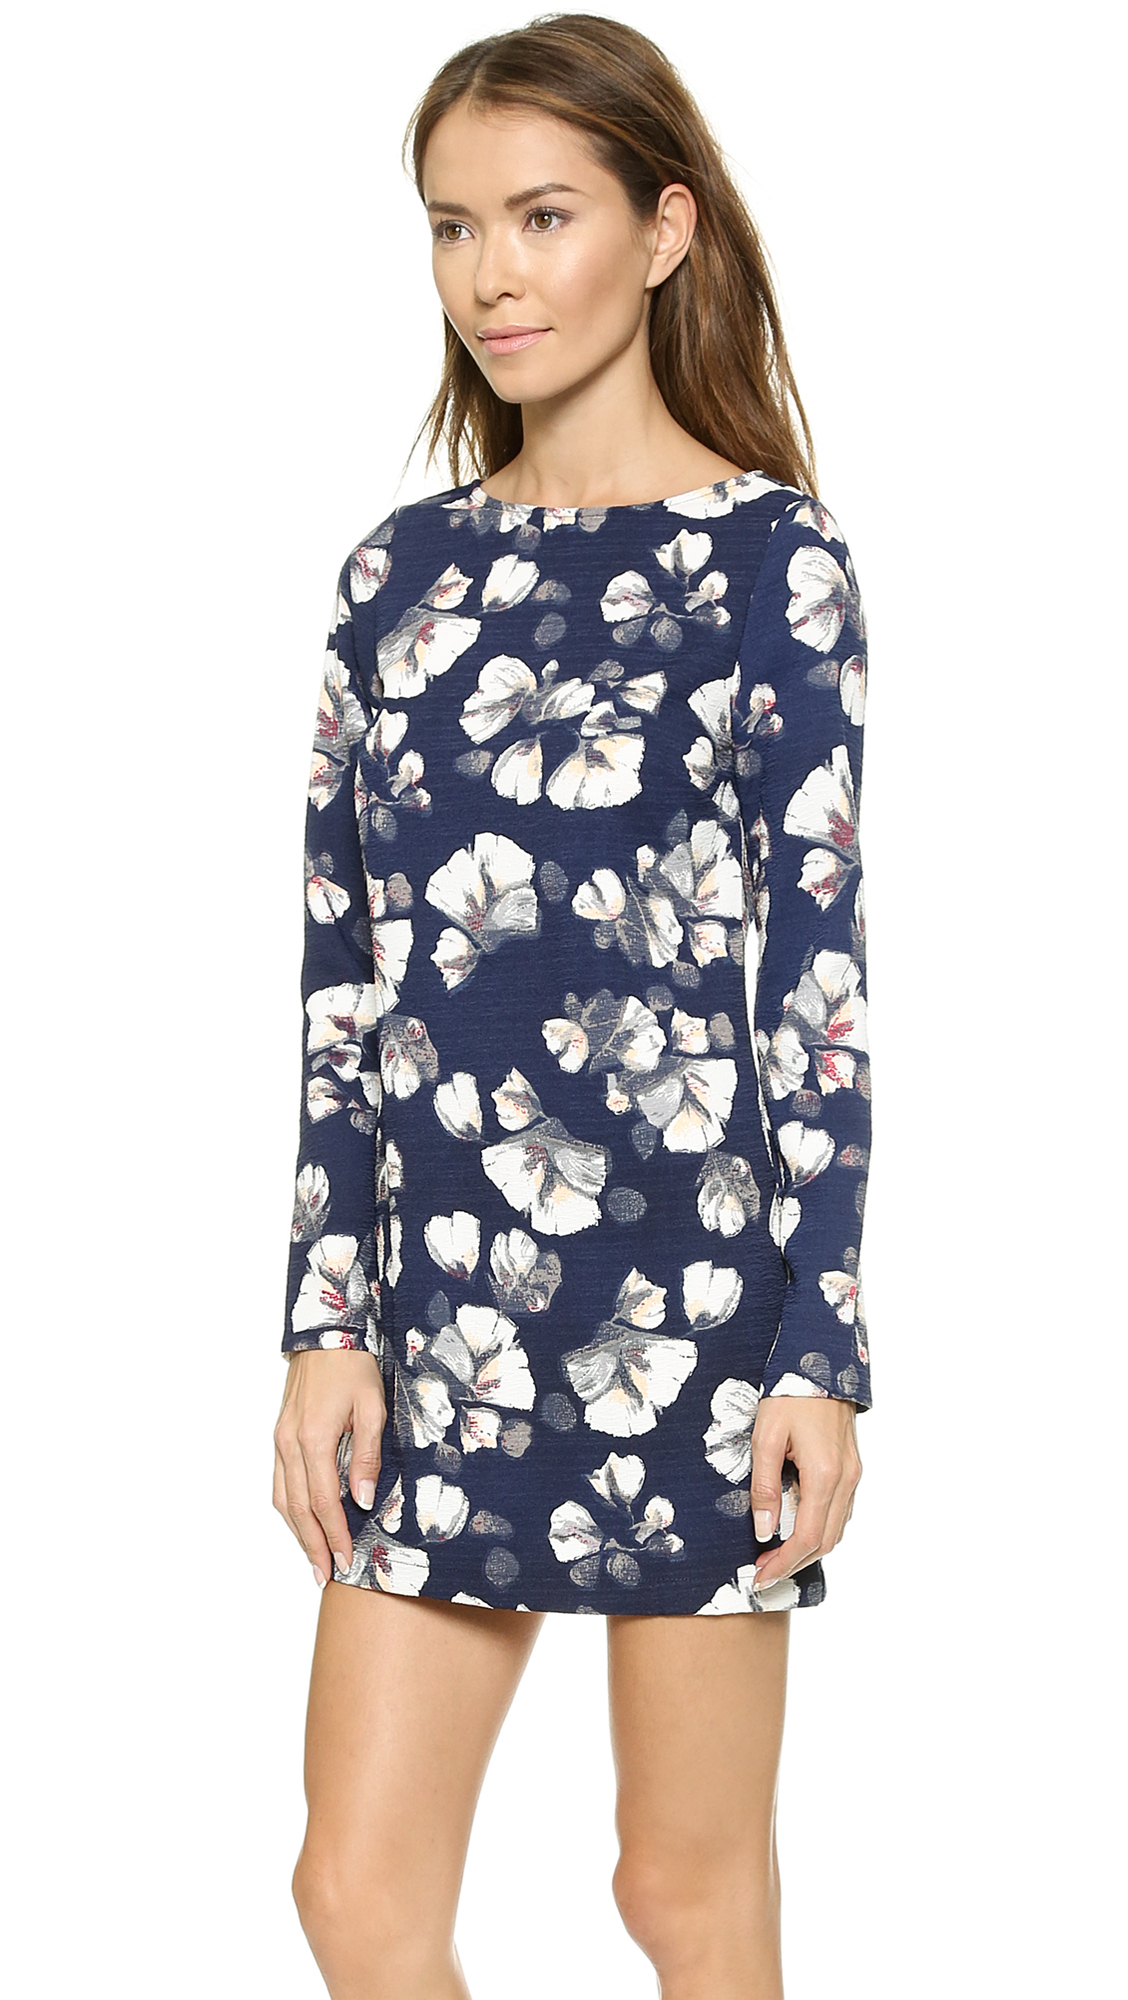 Lyst - Re:Named Long Sleeve Floral Shift Dress in Blue